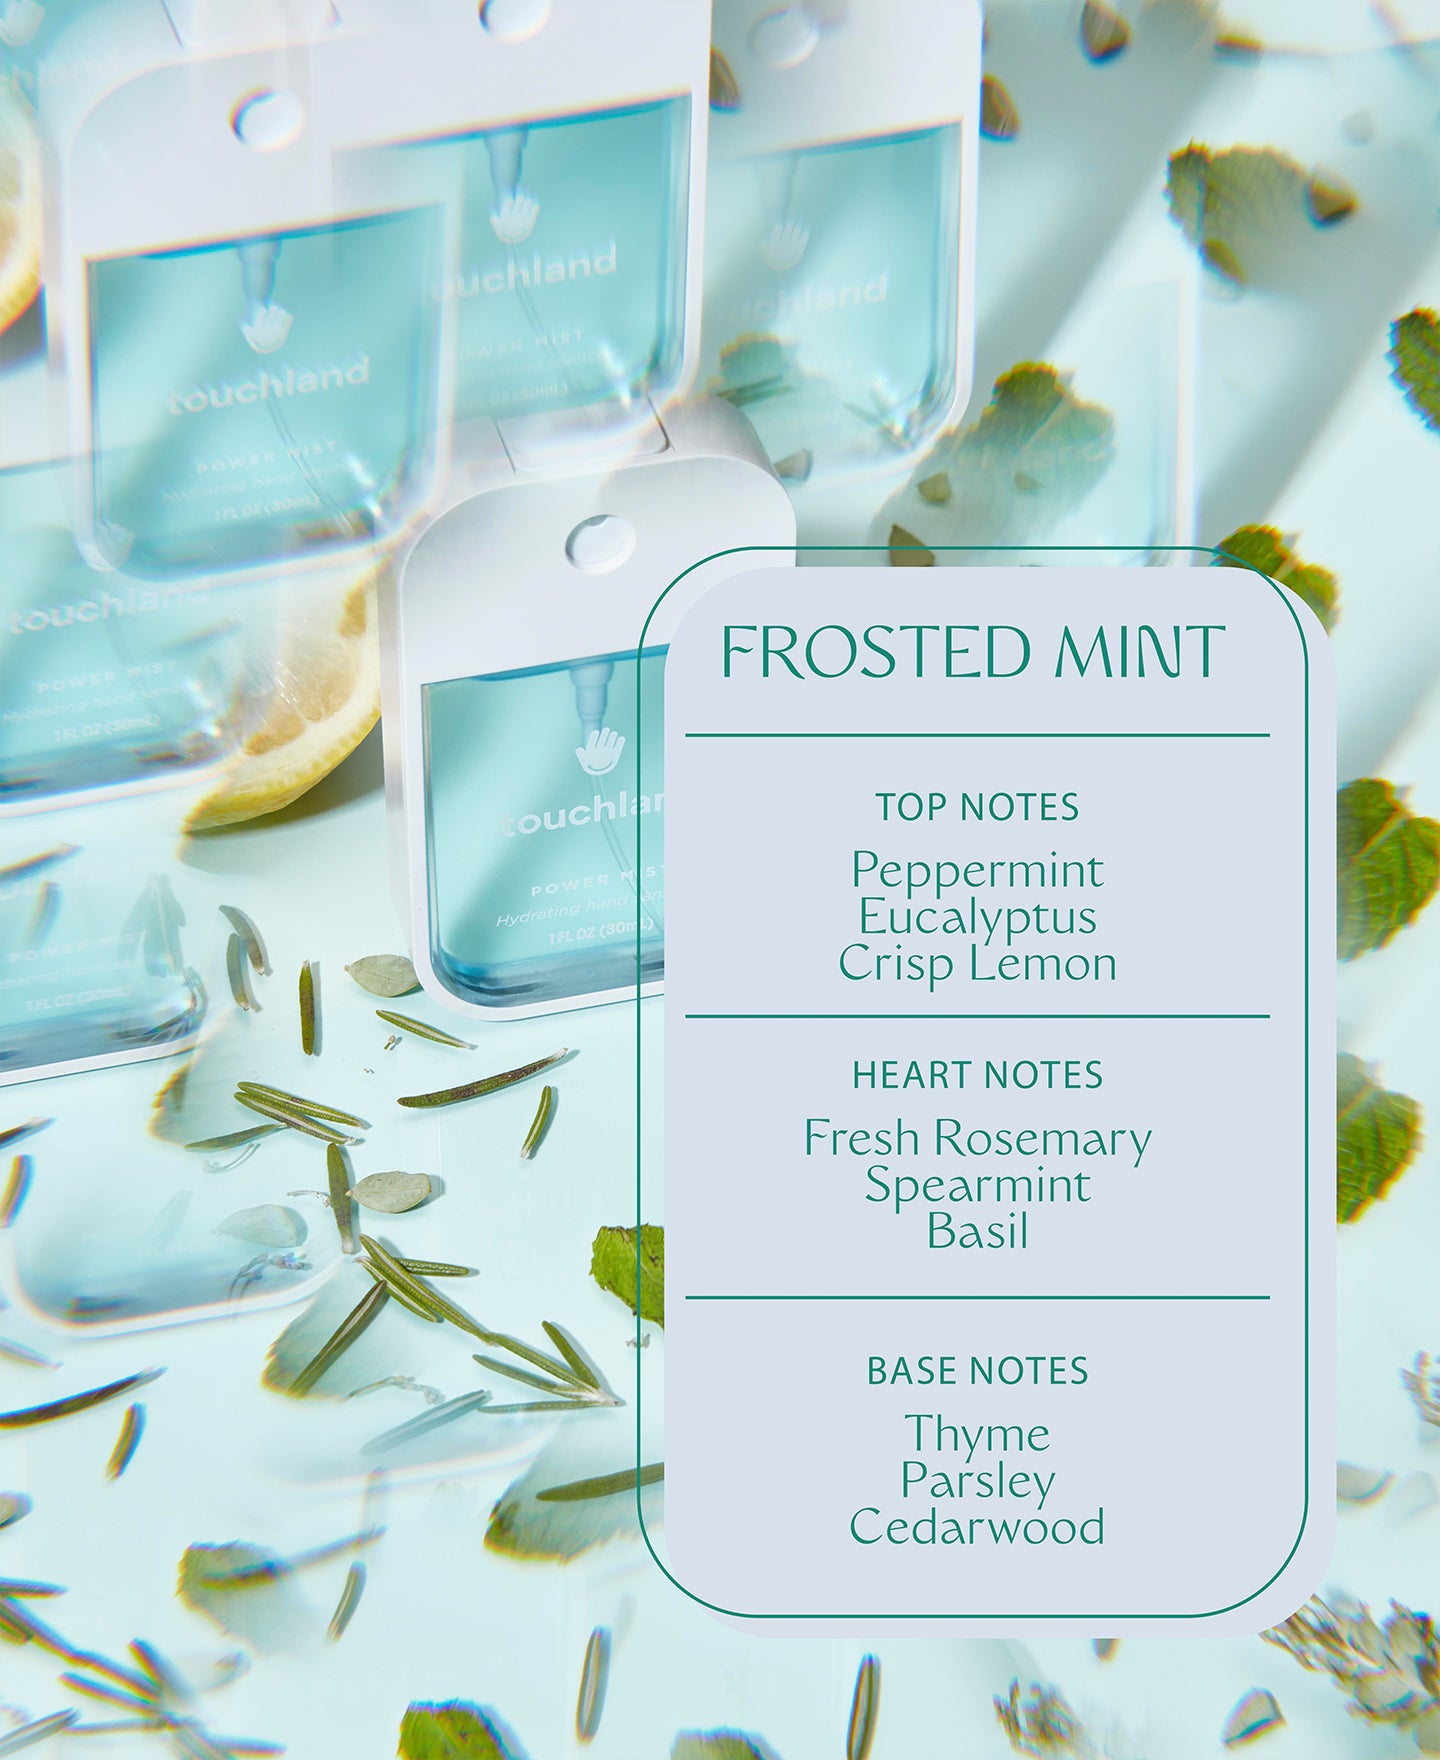 Frosted mint blue power mist key ingredients on light blue background